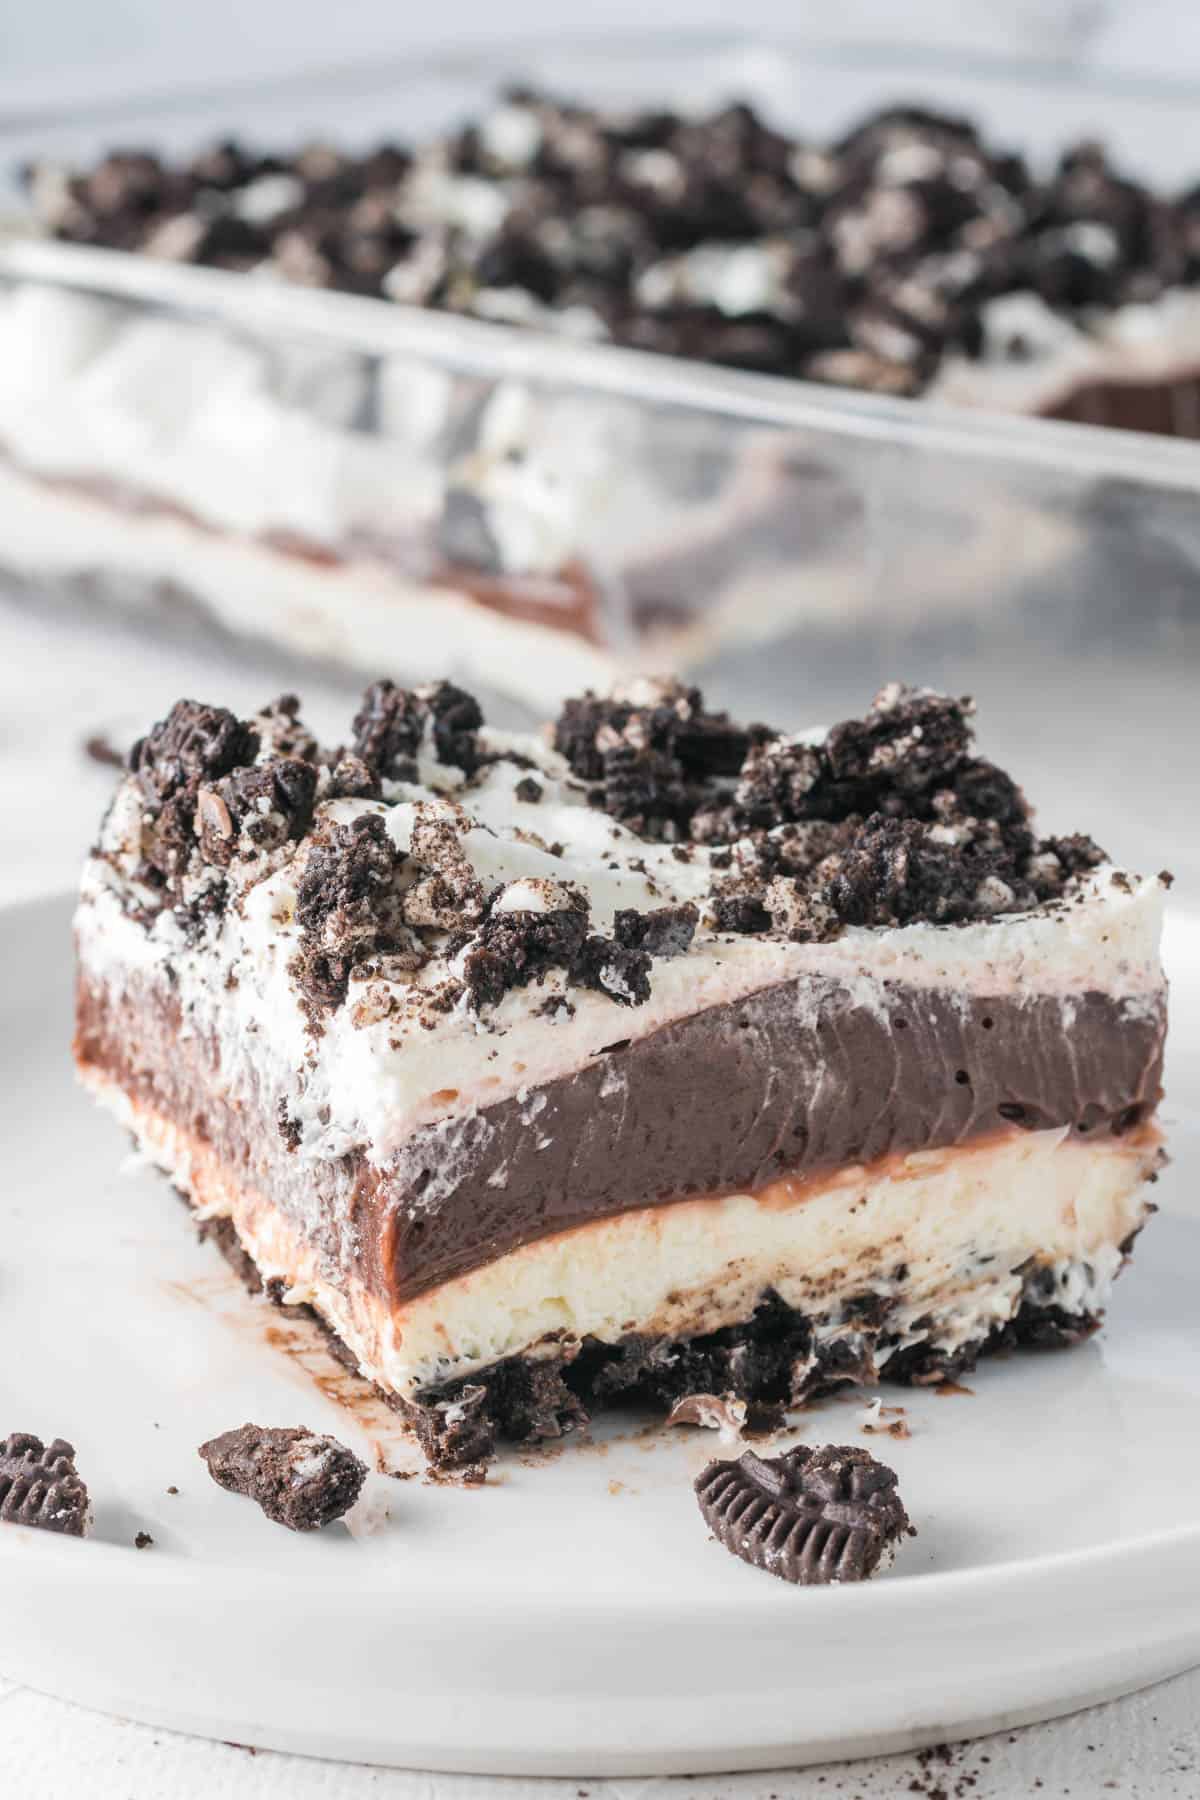 A slice of Oreo dessert on a plate in front of the rest of the dessert in a glass baking dish.